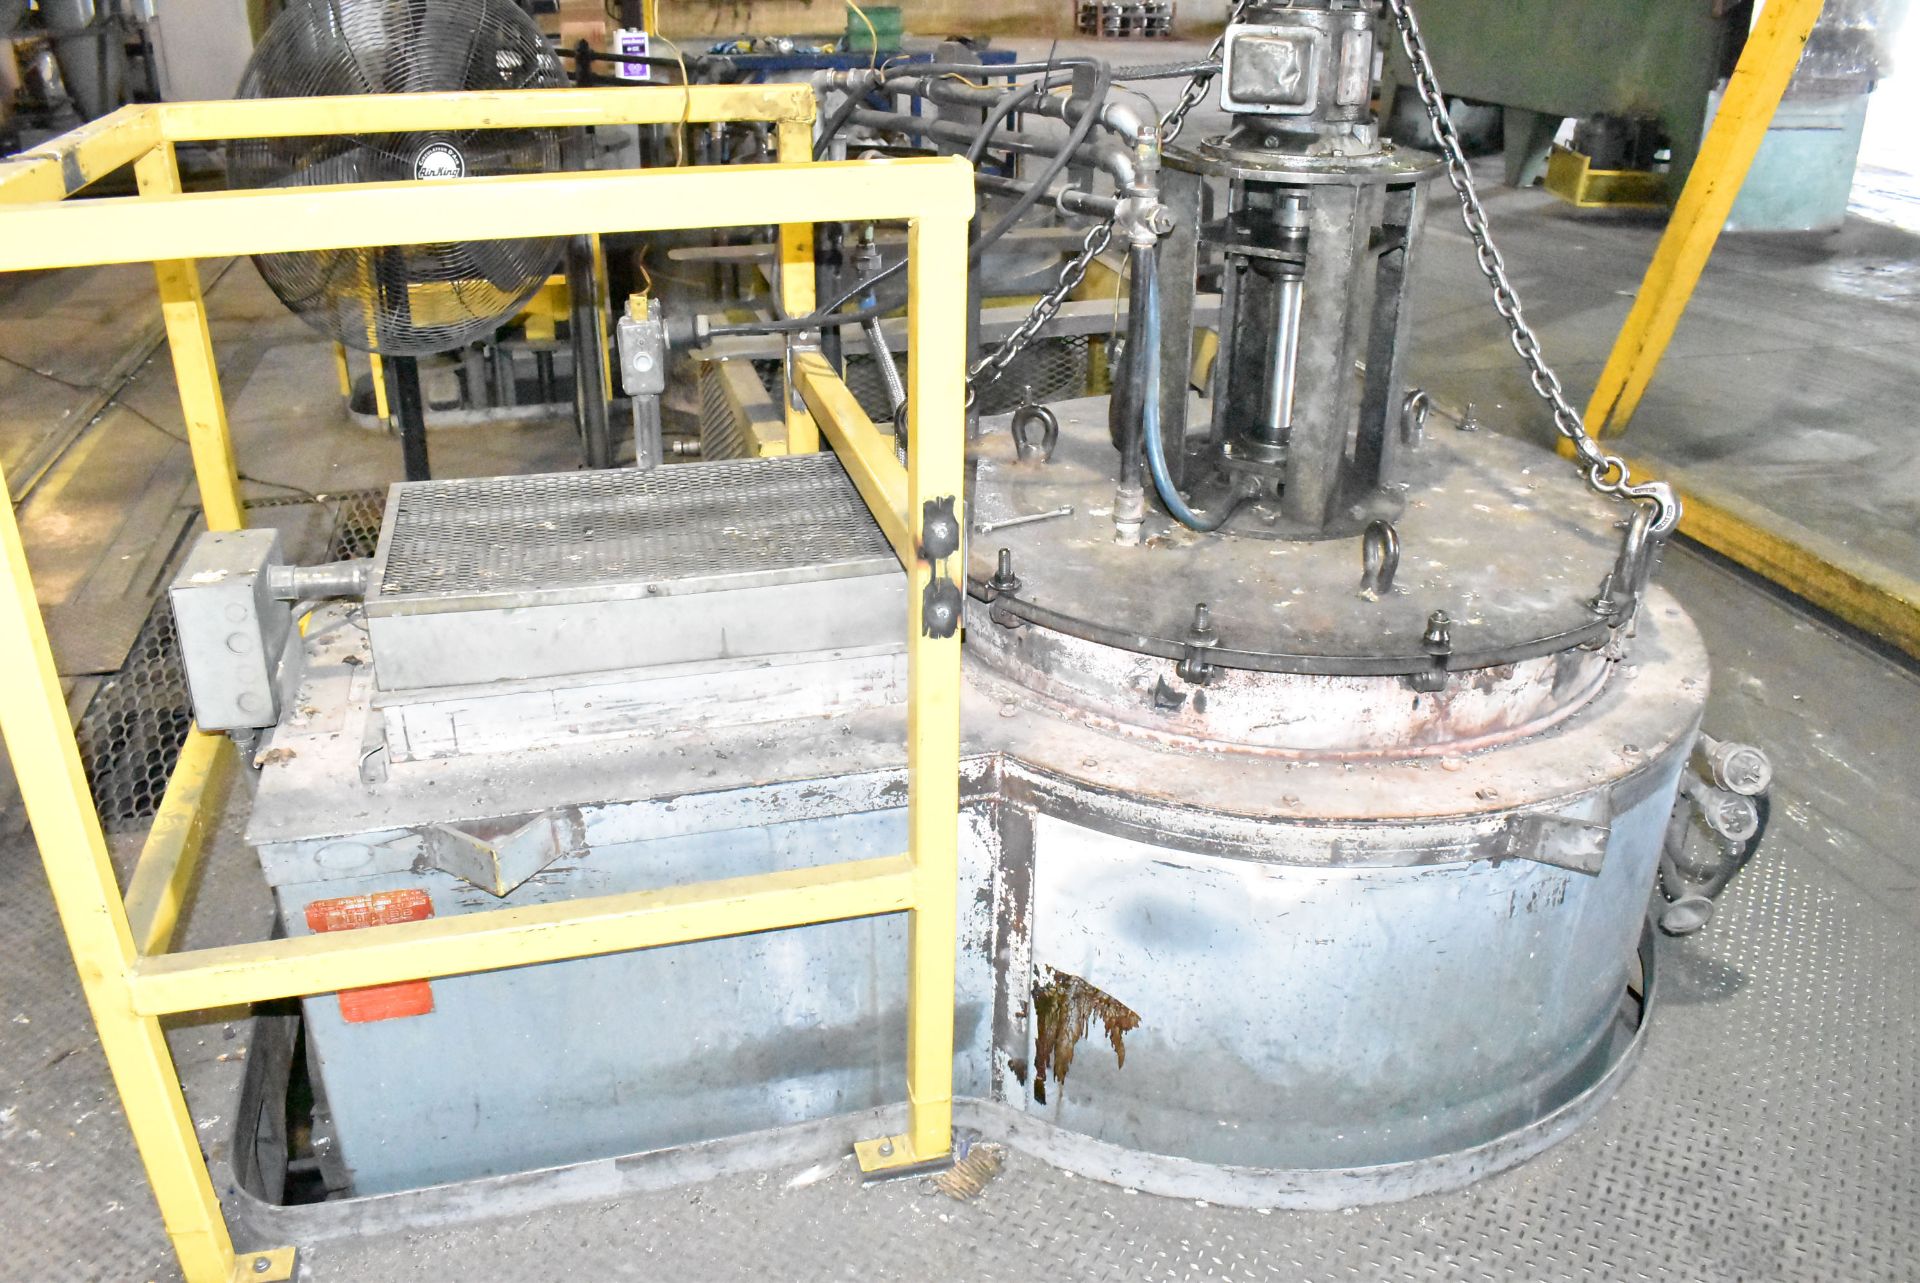 LINDBERG 12-EC 33-48-12 PIT TYPE ELECTRIC NITRIDING FURNACE WITH 1250 DEGREES F MAX TEMP, 28" - Image 6 of 10